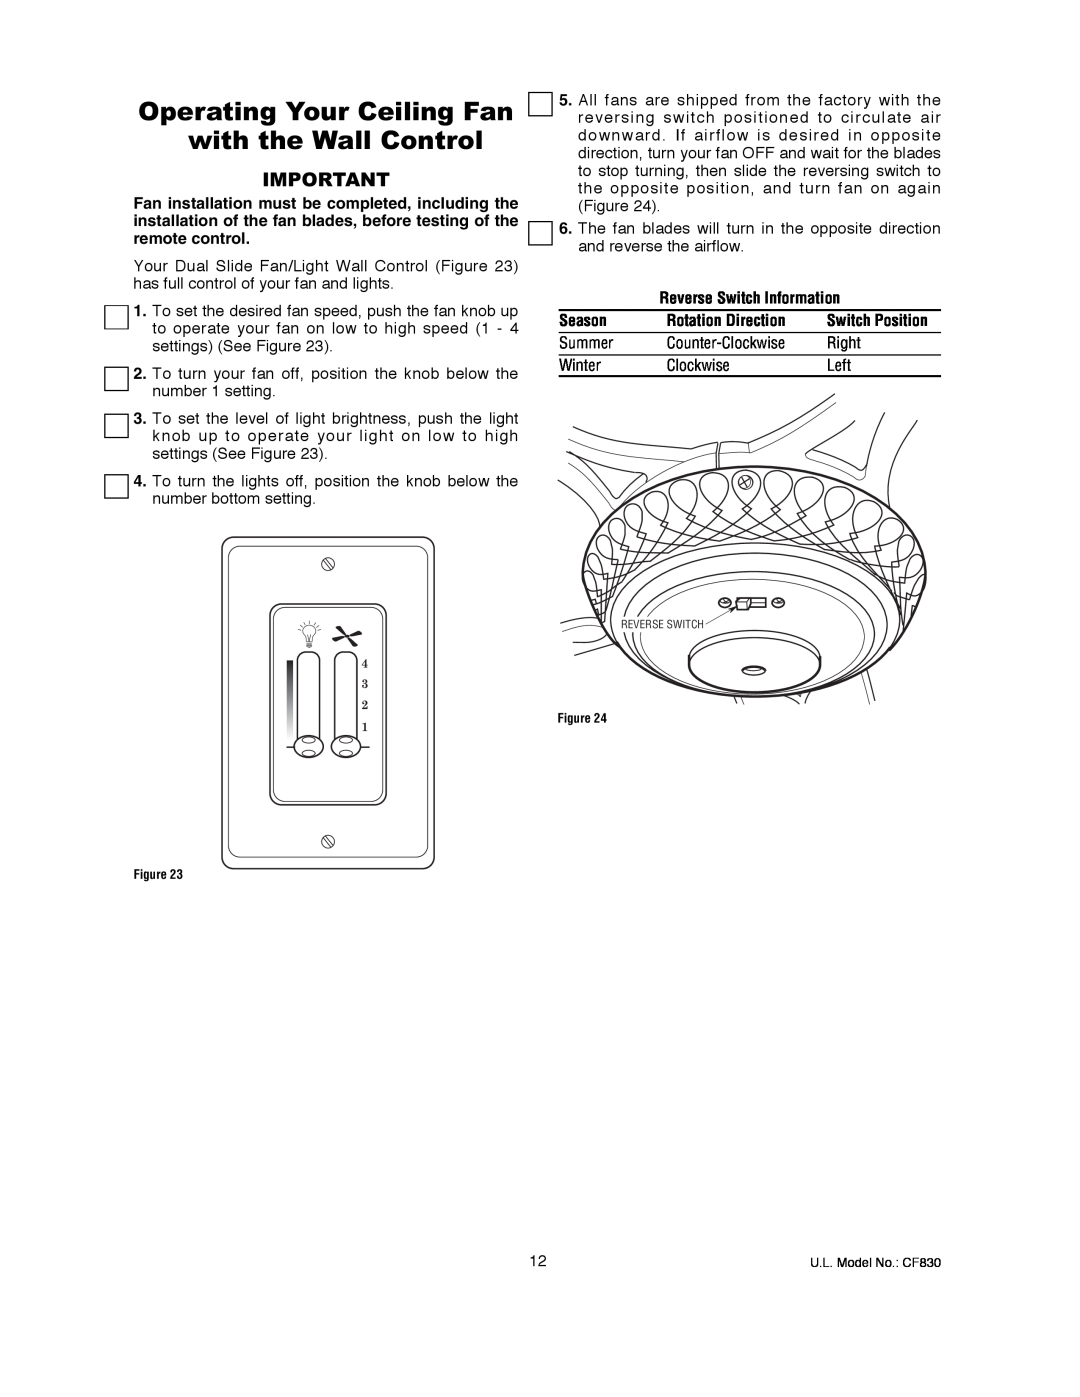 Emerson CF830GES00 owner manual Operating Your Ceiling Fan with the Wall Control, Reverse Switch Information, Season 